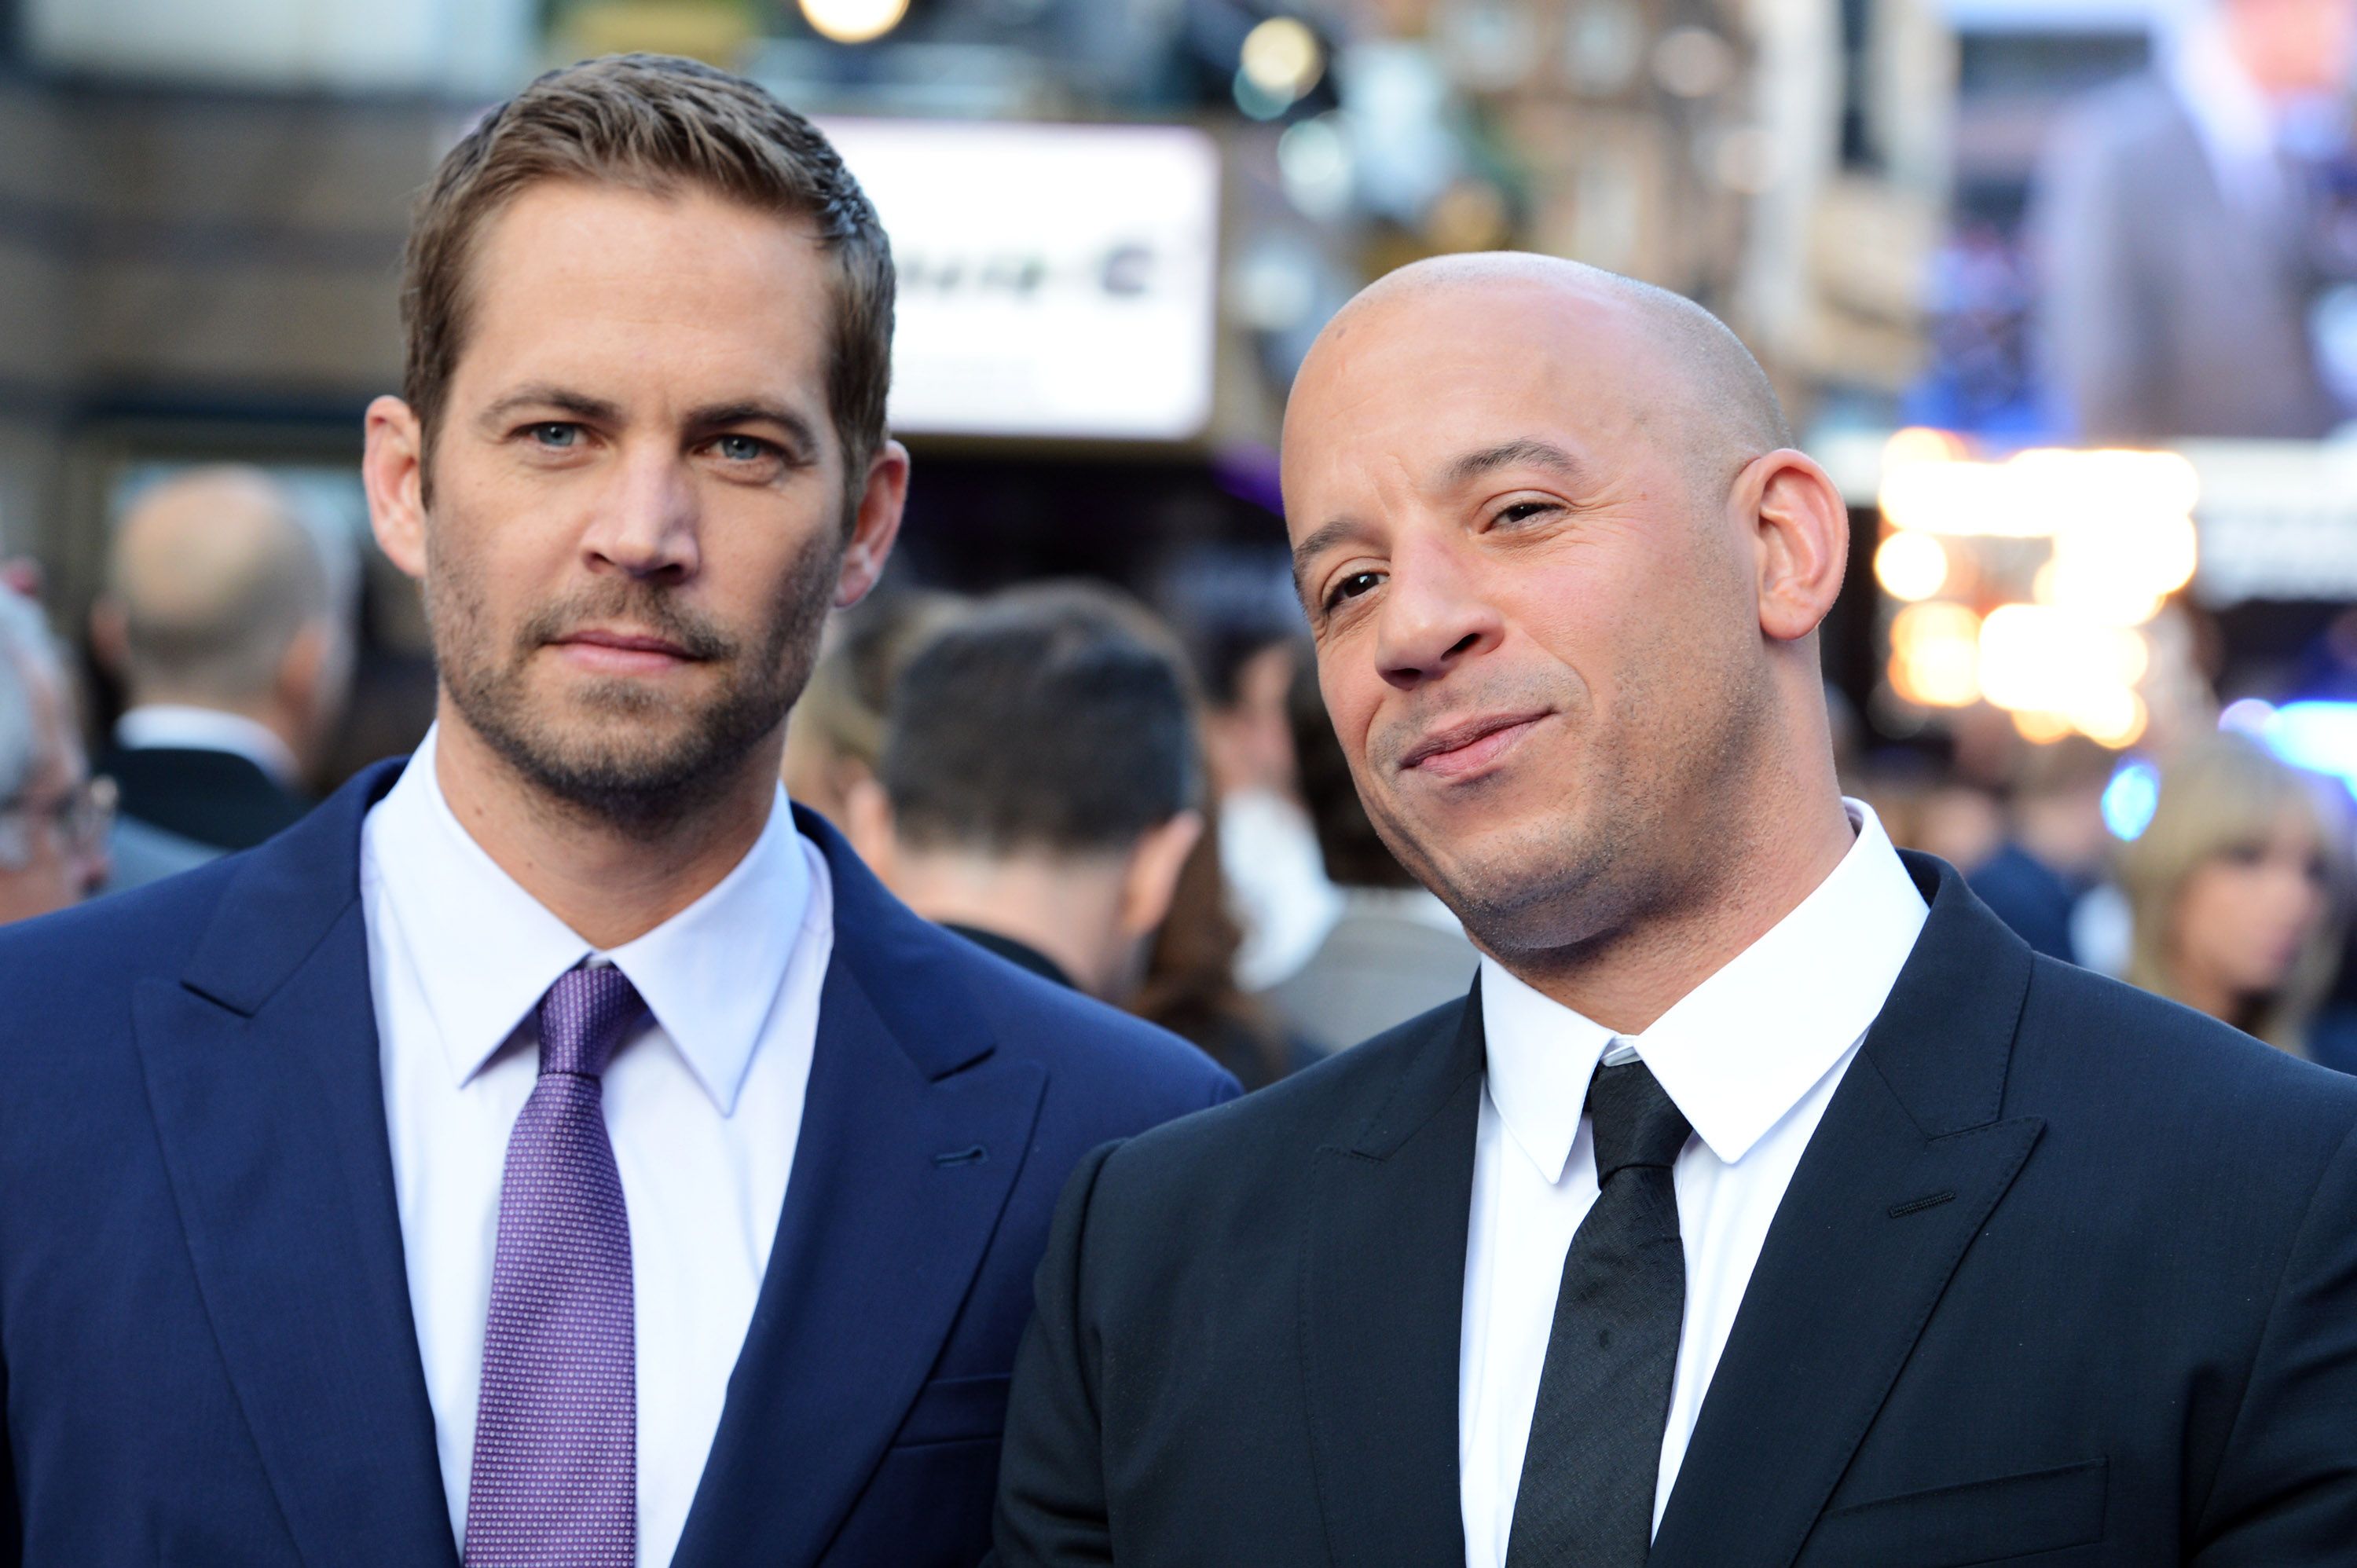 Paul Walker and Vin Diesel at the world premiere of 'Fast And Furious 6' at The Empire Leicester Square on May 7, 2013 | Photo: Getty Images